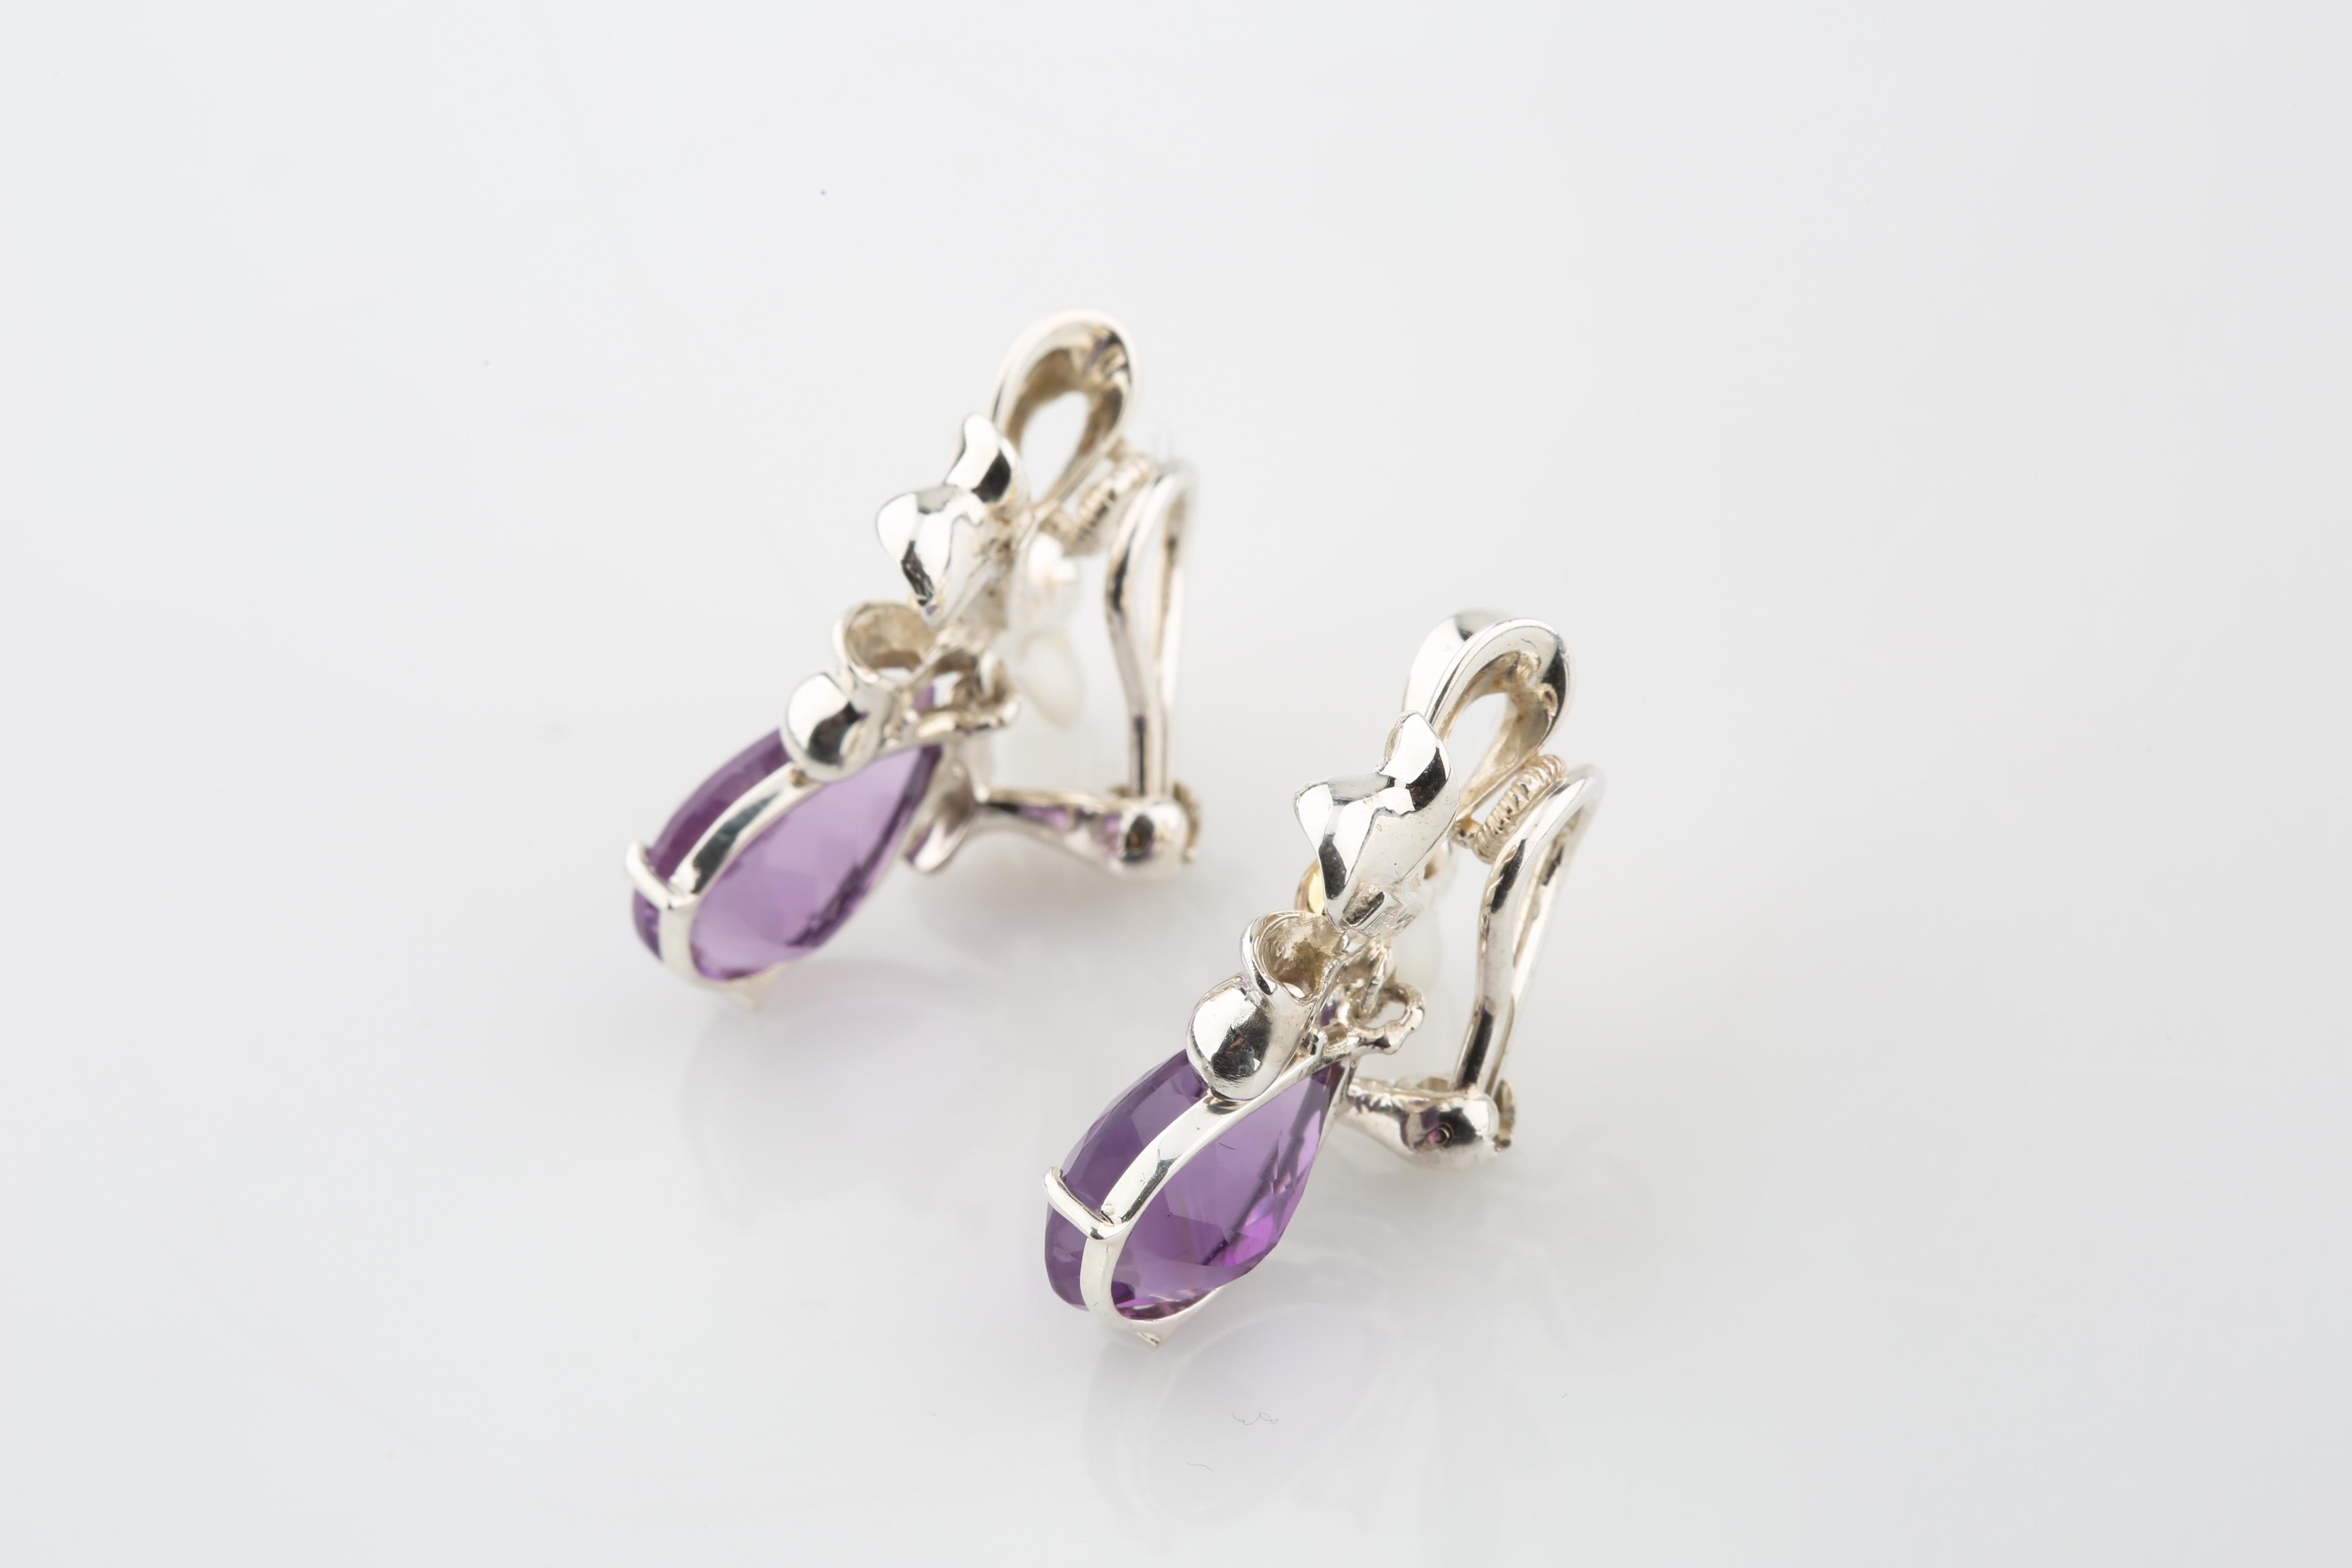 Authentic Tiffany & Co. amethyst bow earrings
Sterling silver bows with a yellow gold center
A large sparkling purple amethyst hangs from each earring
Omega back fastening system
Metal: 925 sterling silver and yellow gold
Hallmarks: TIFFANY&CO.925 